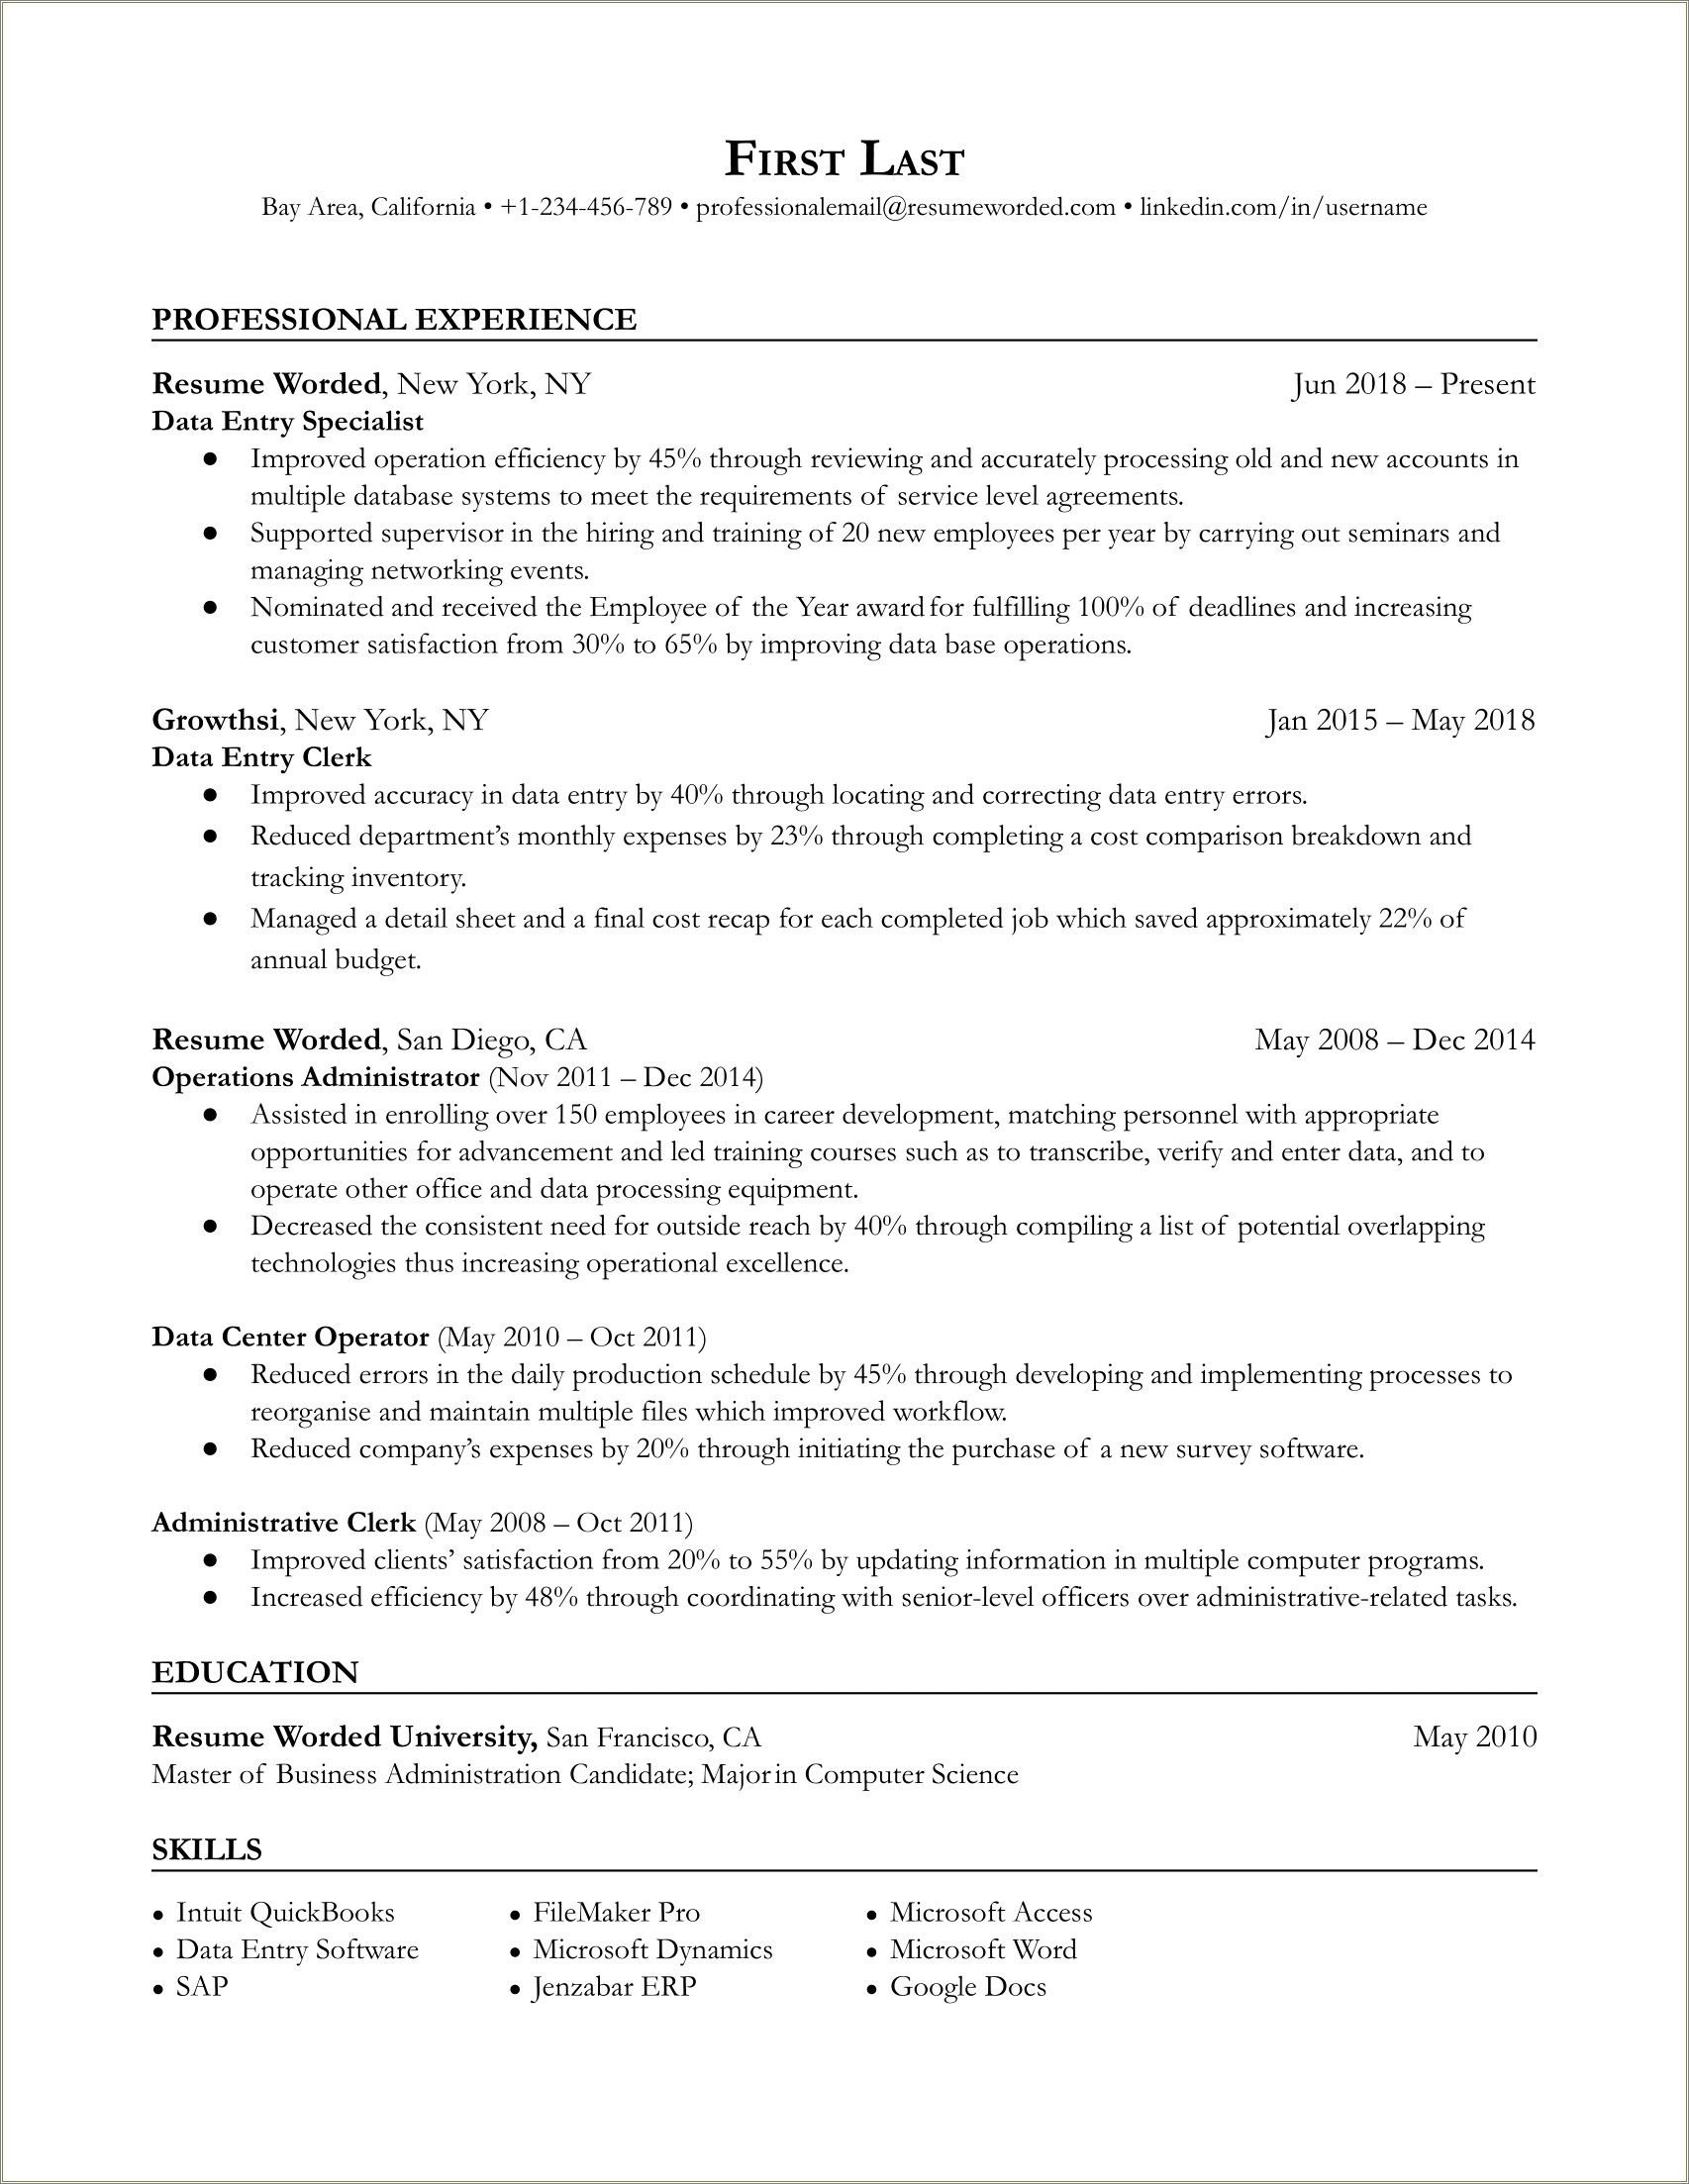 Resume Summary For Data Entry Position